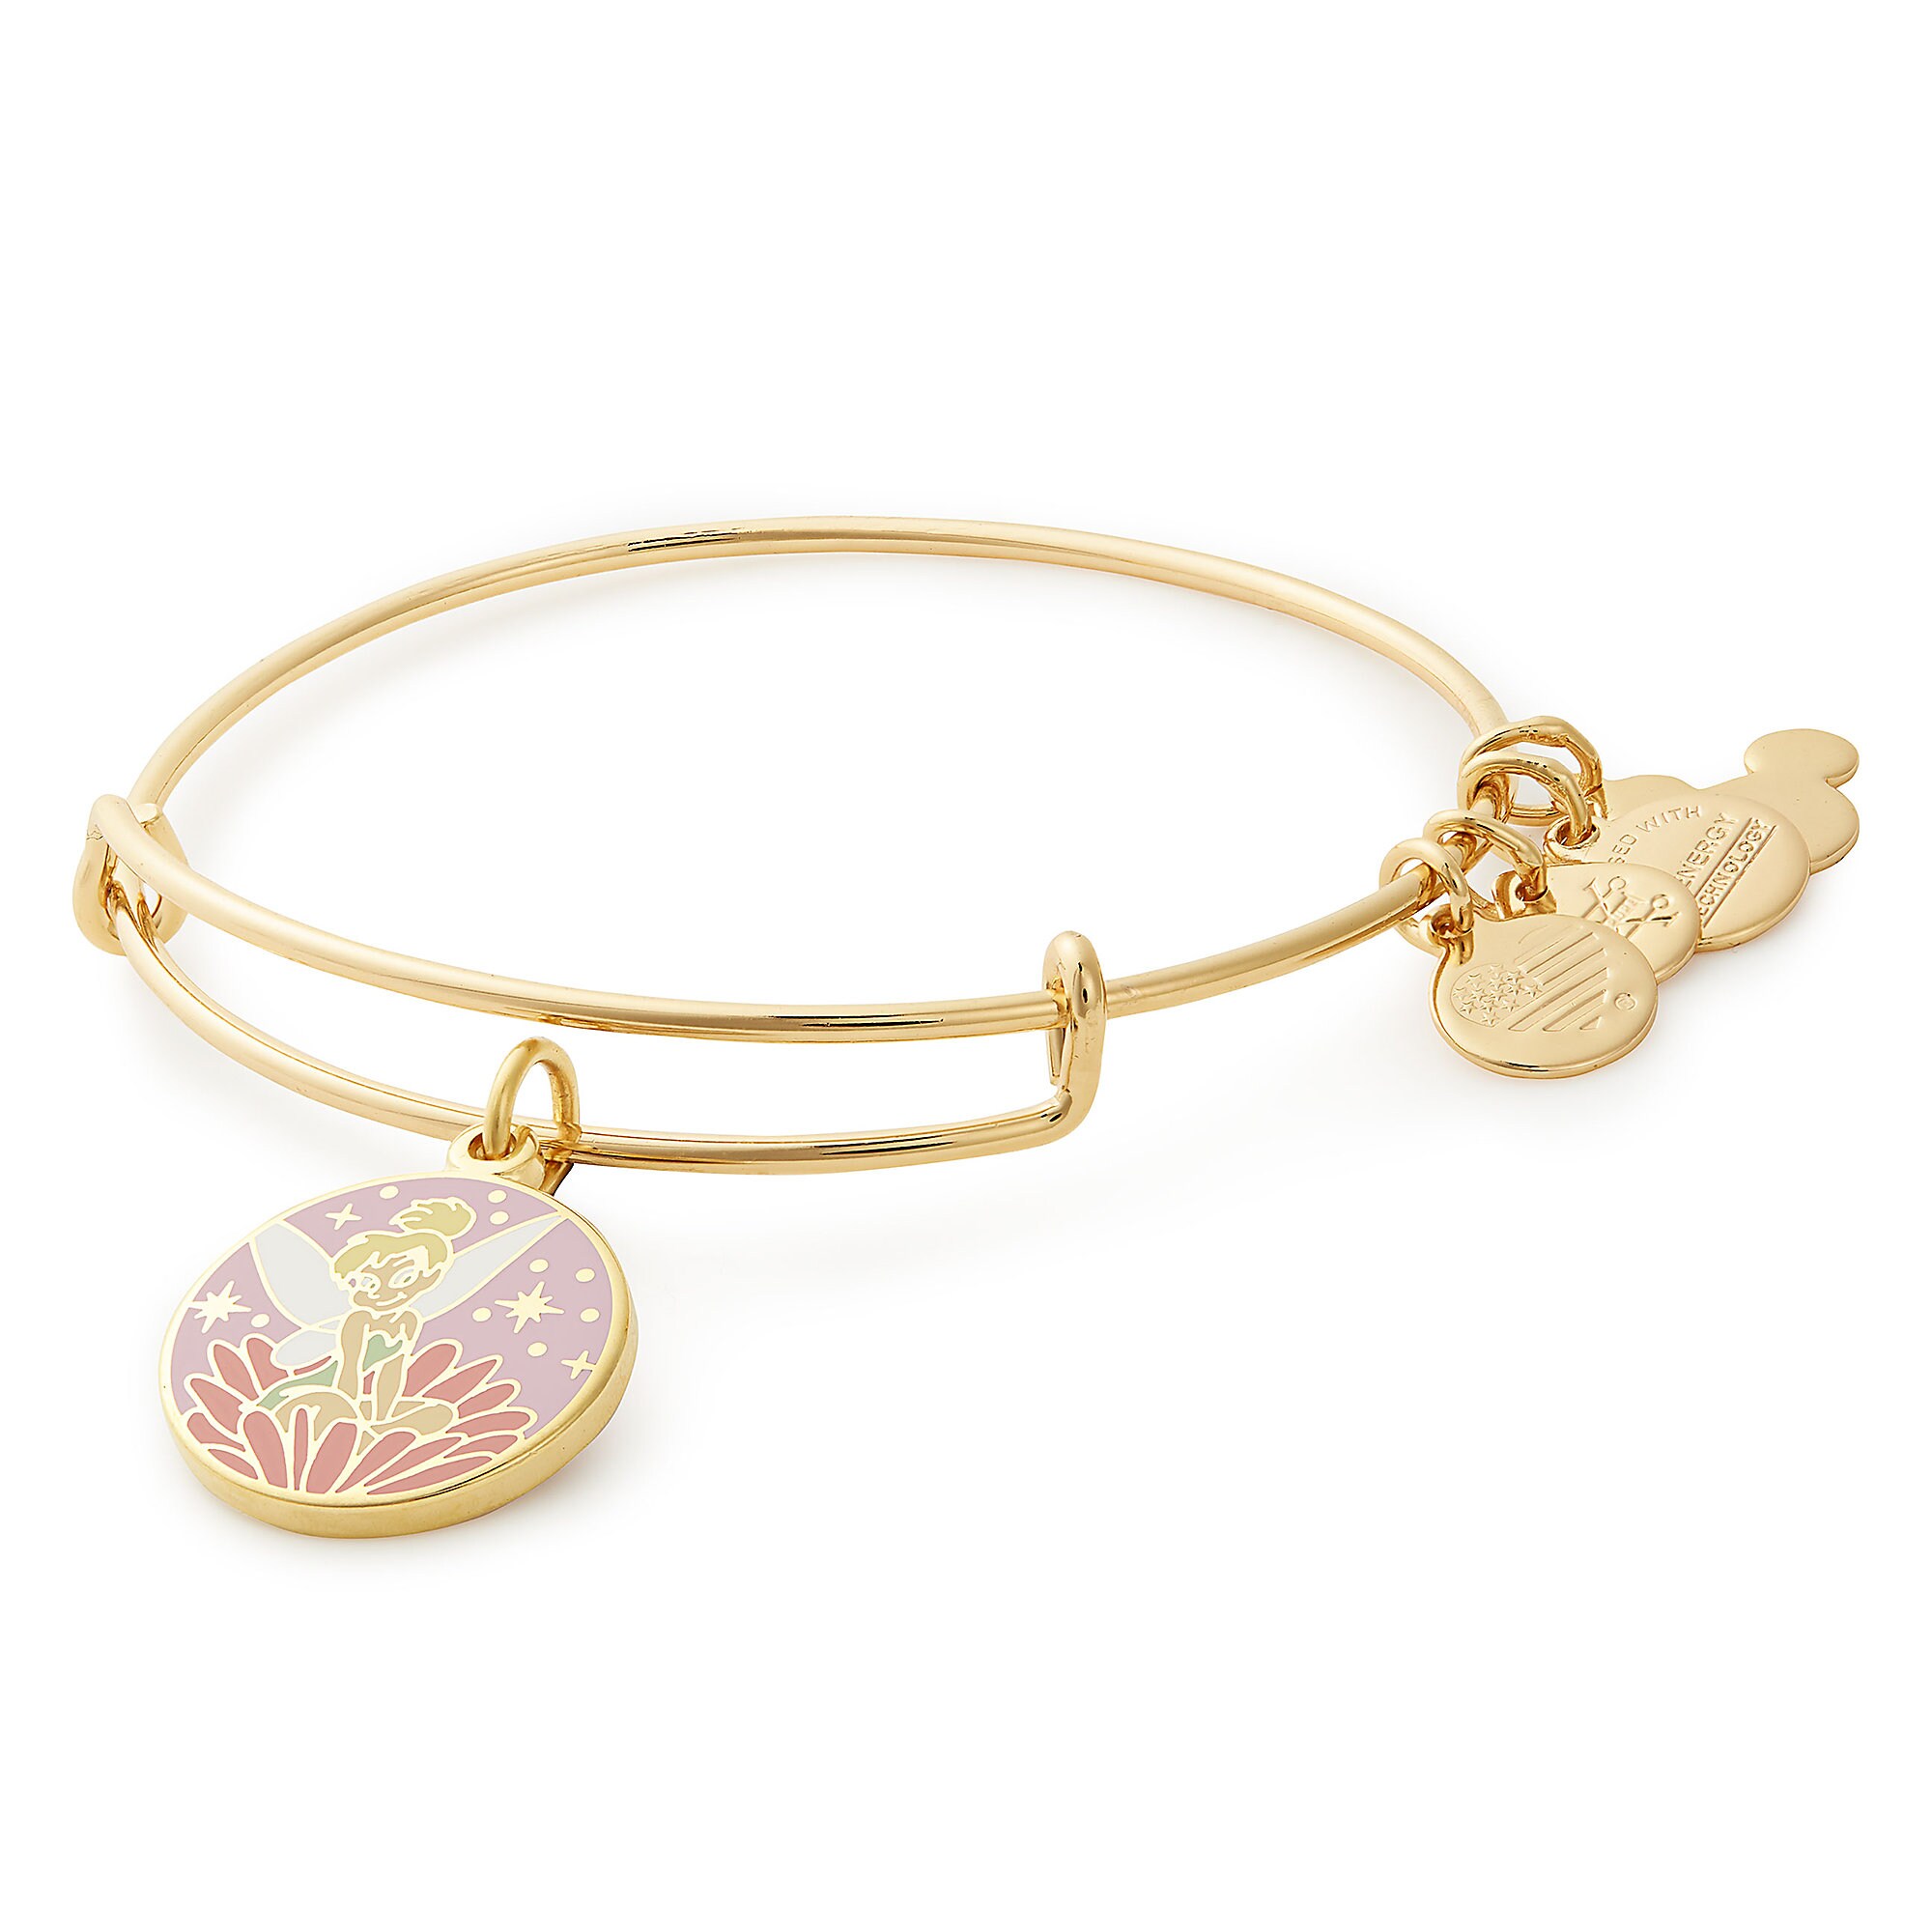 Tinker Bell Bangle by Alex and Ani - Gold